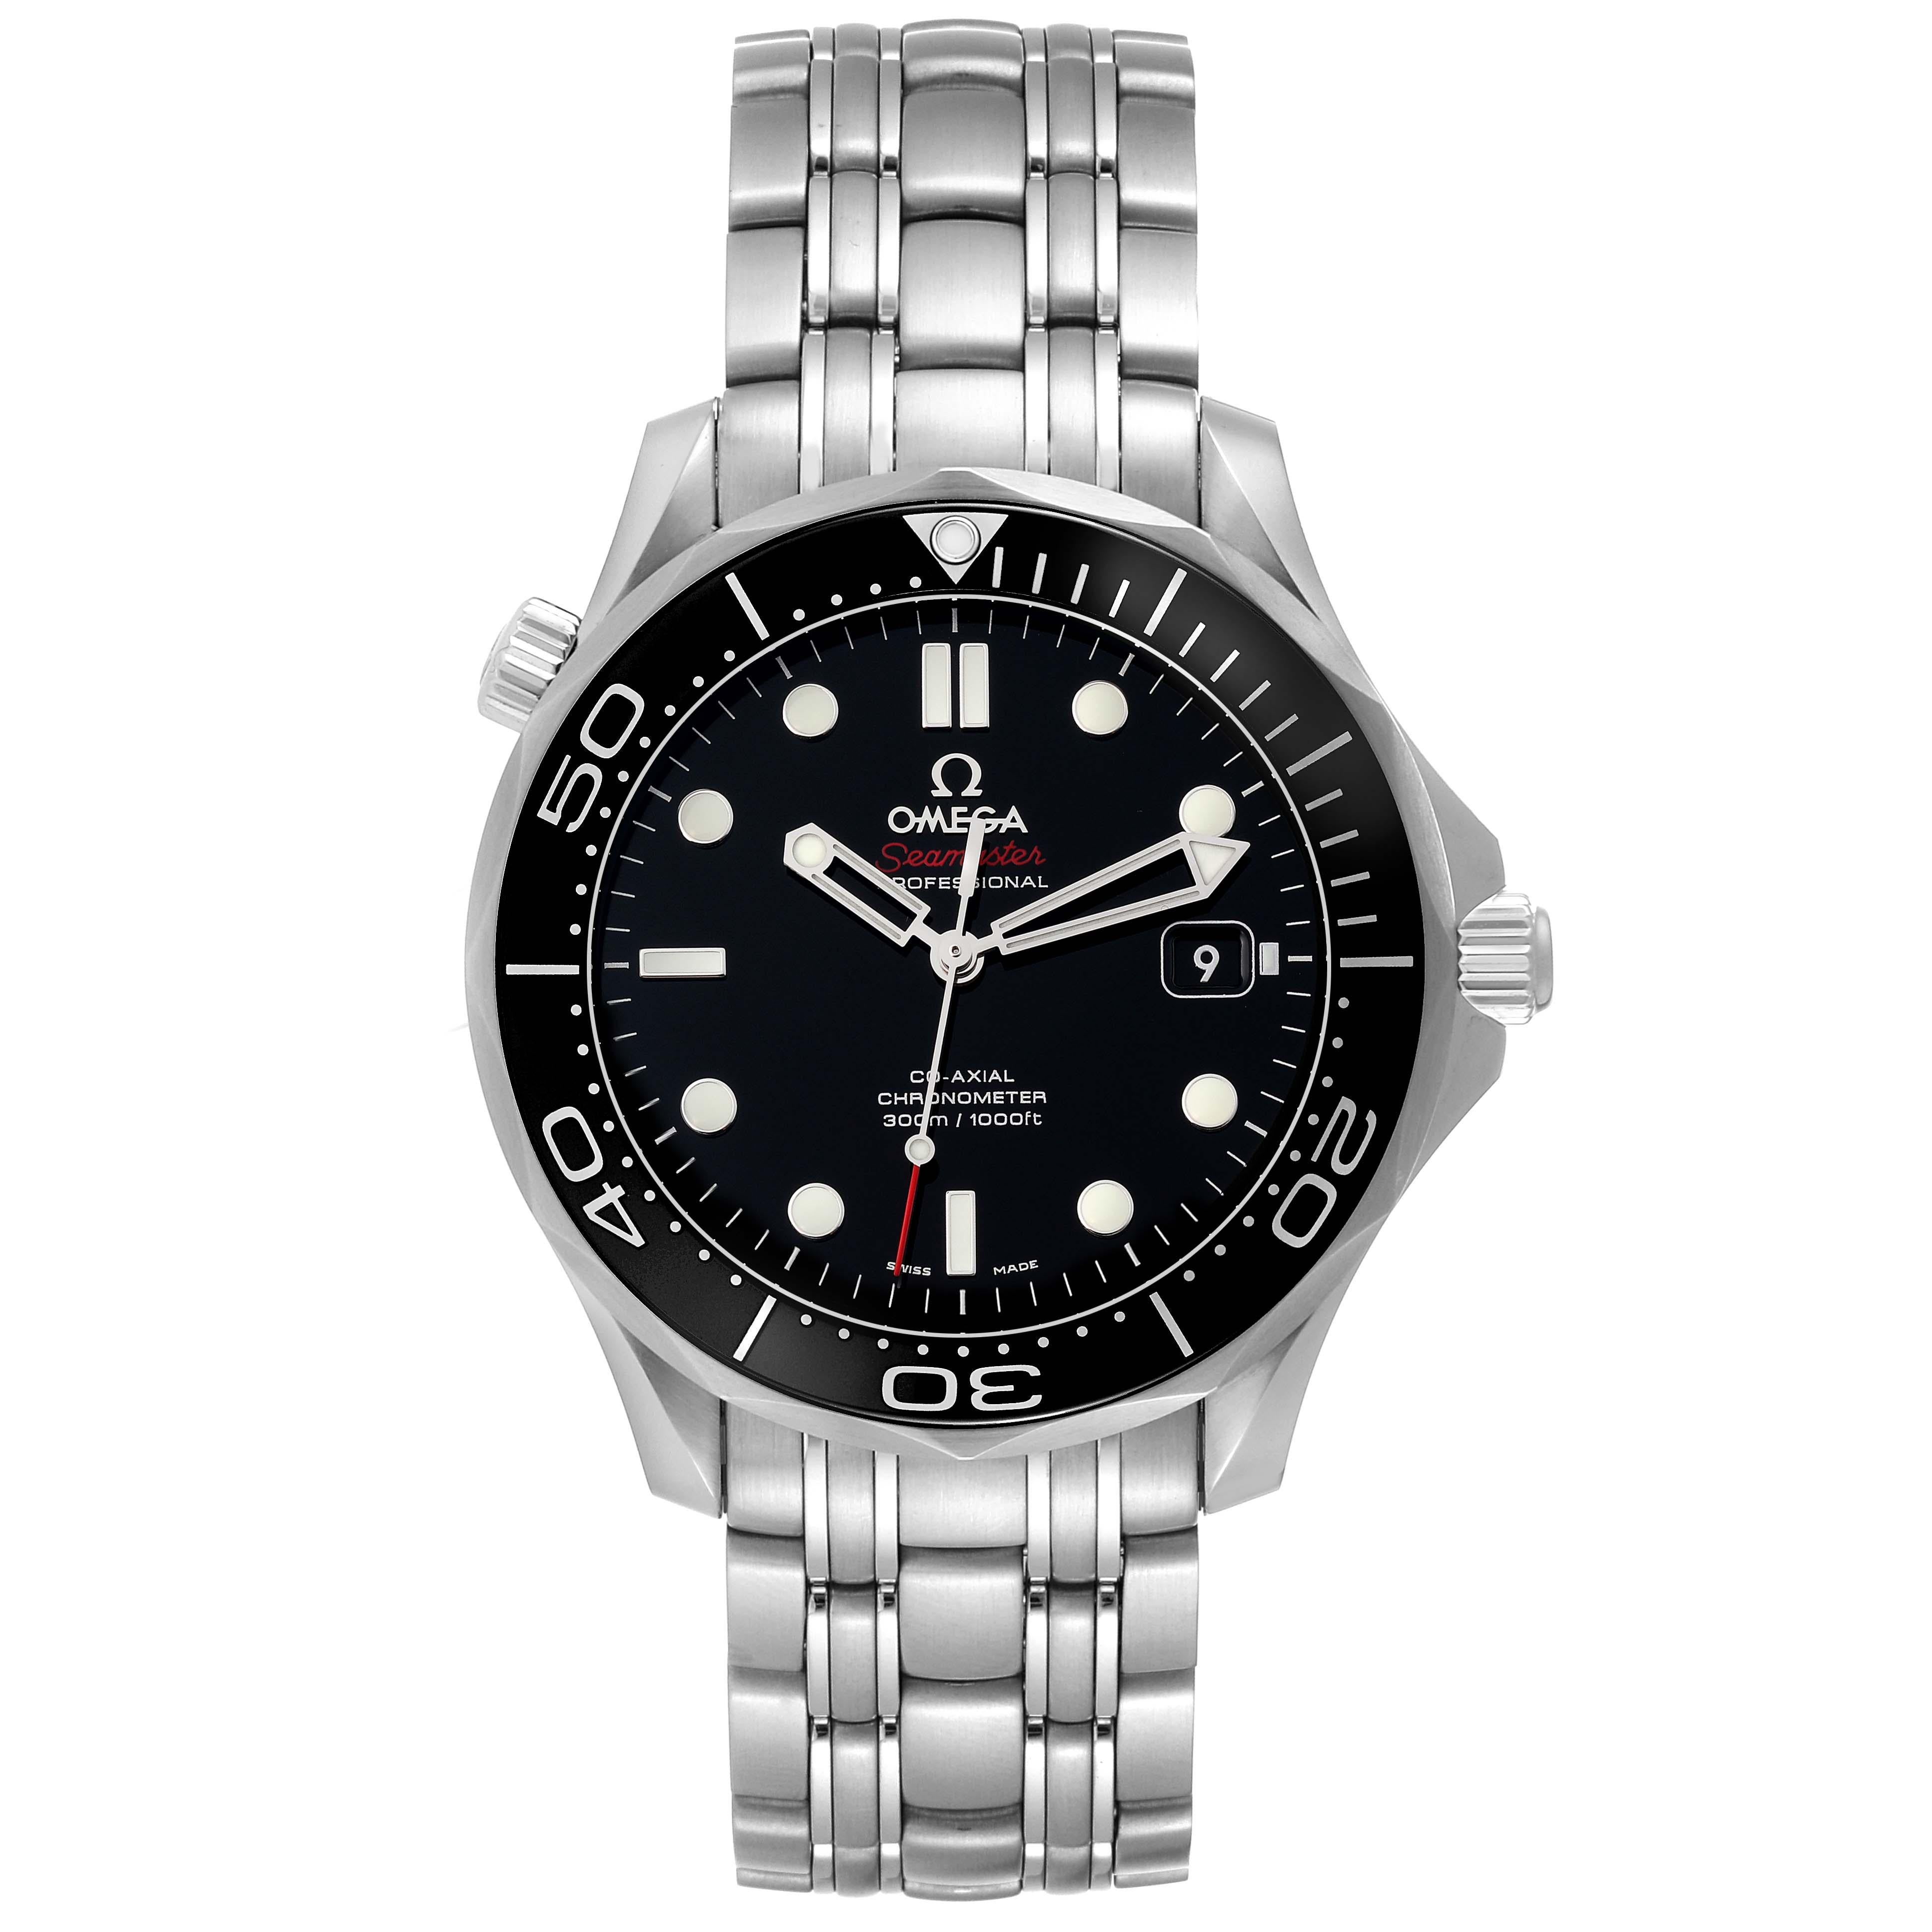 Omega Seamaster Diver 300M Steel Mens Watch 212.30.41.20.01.003 Box Card For Sale 5